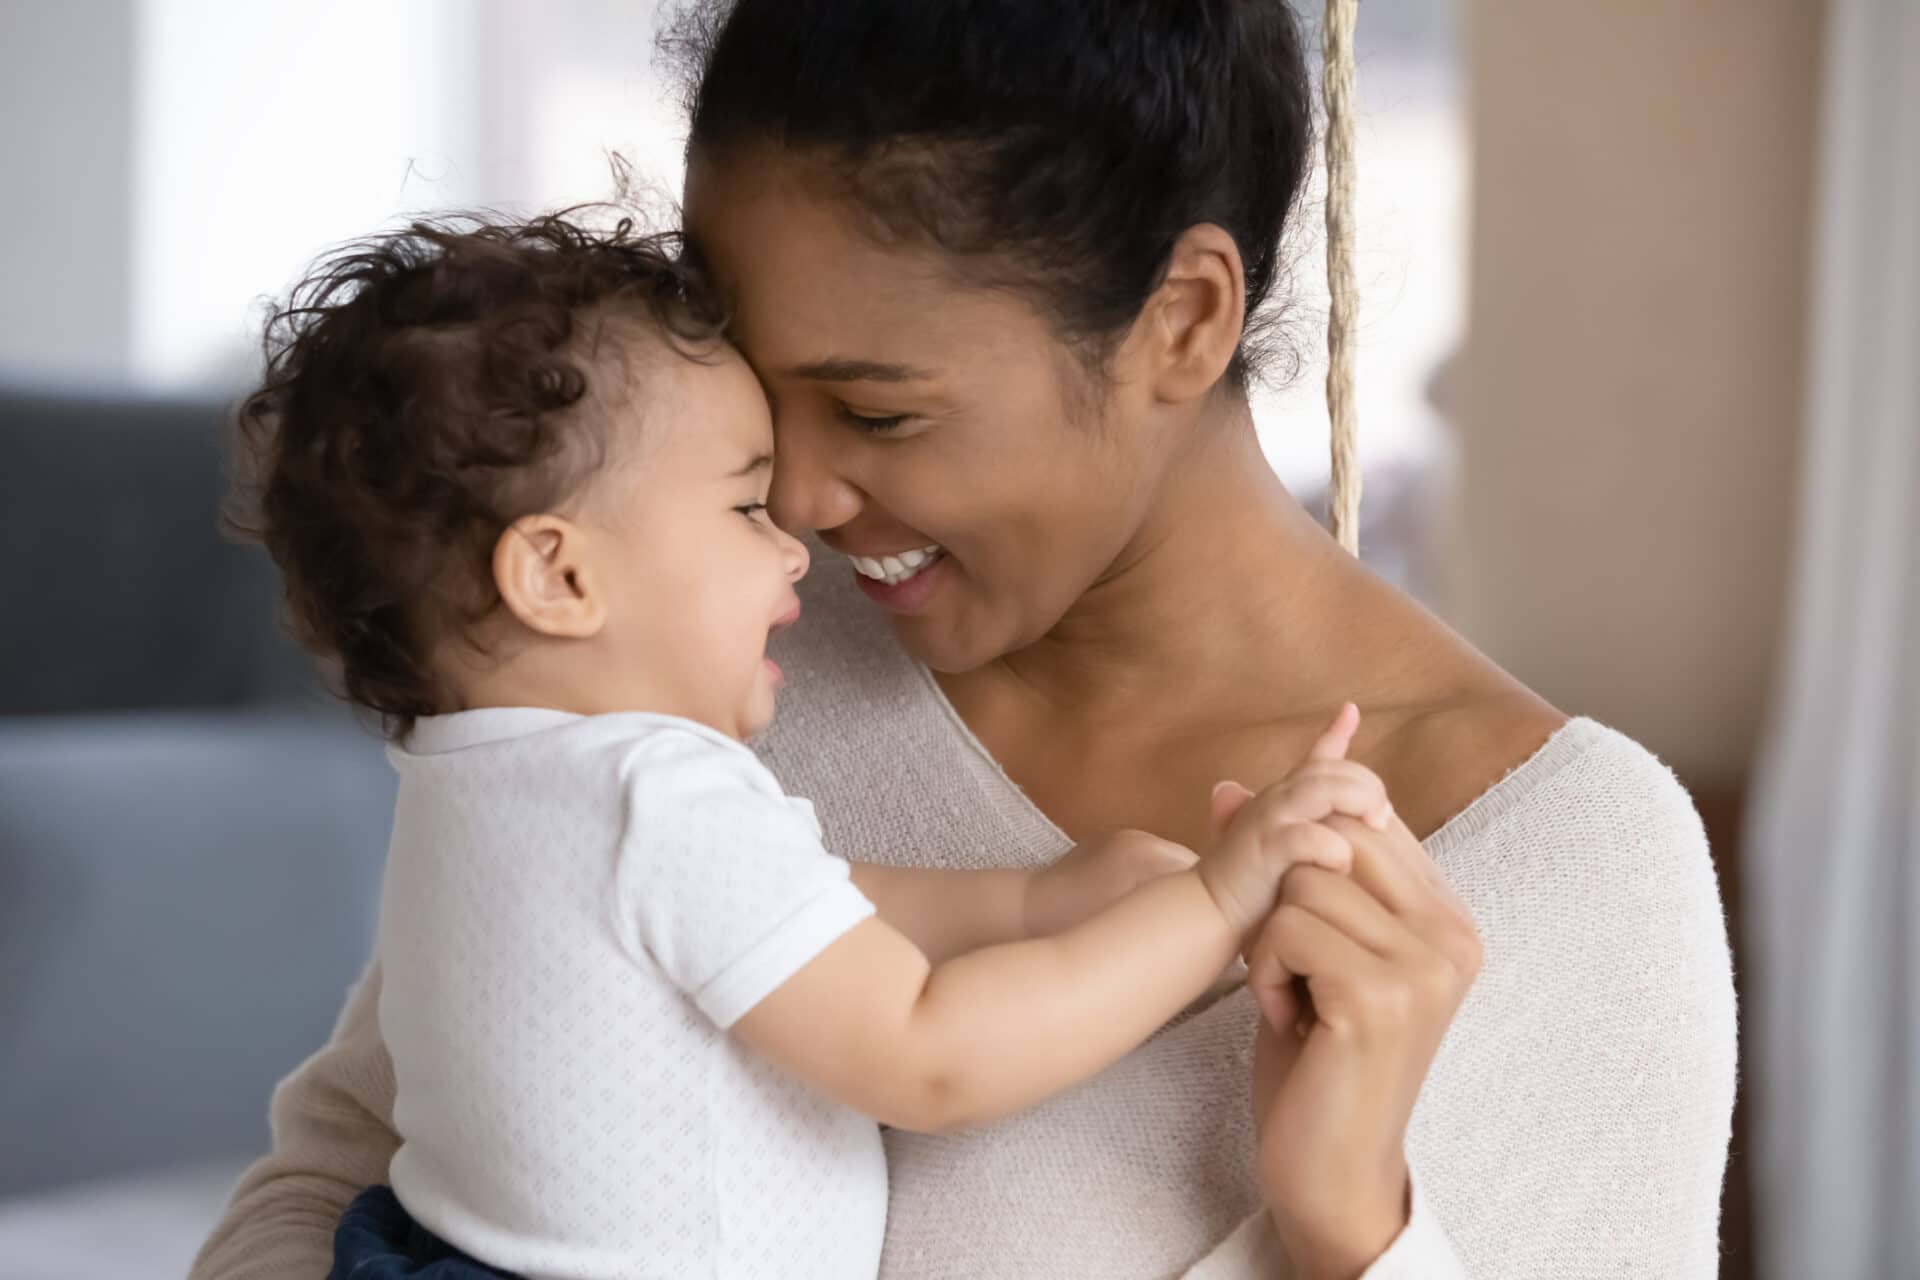 4 factors that can decrease breast milk supply – and how to replenish it, Your Pregnancy Matters